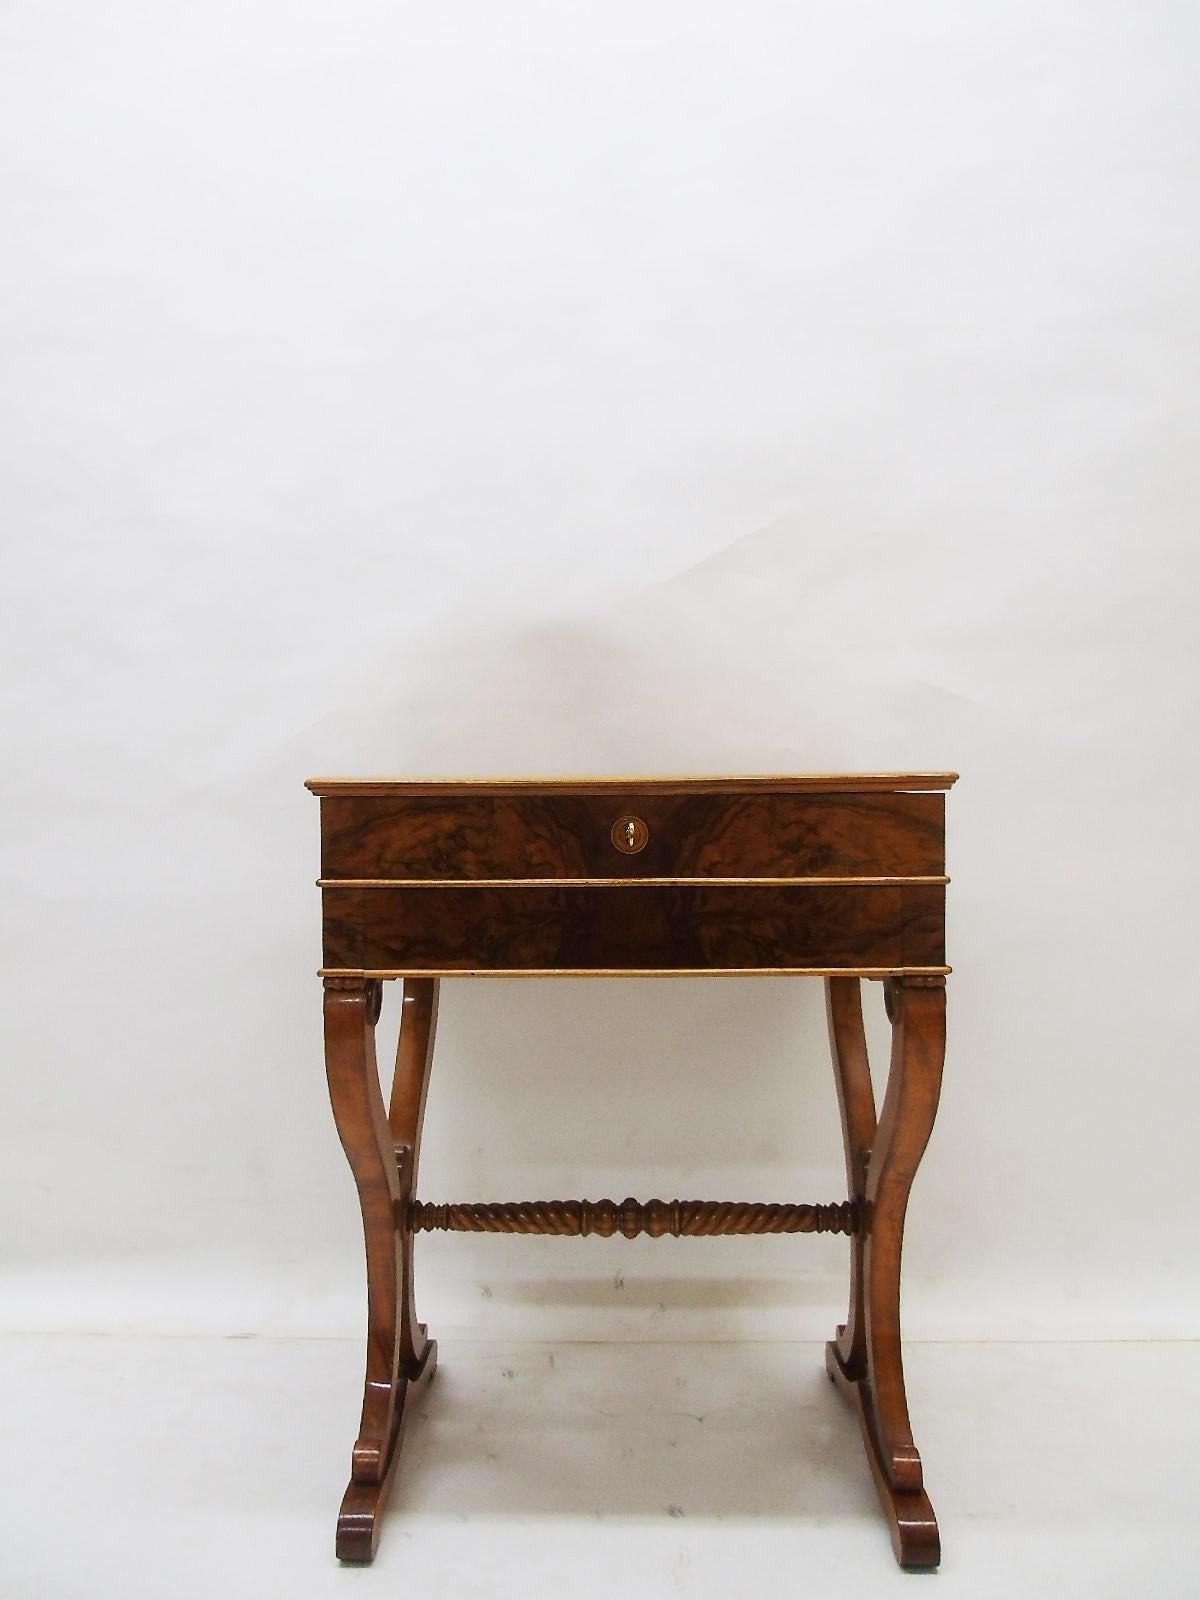 Petite and wonderful Biedermeier sewing table or elegant side table from southern Germany, 1830s. As a beautiful example of antique Biedermeier furniture it convinces with its bookmatched walnut veneer on the tabletop and the exclusive maple